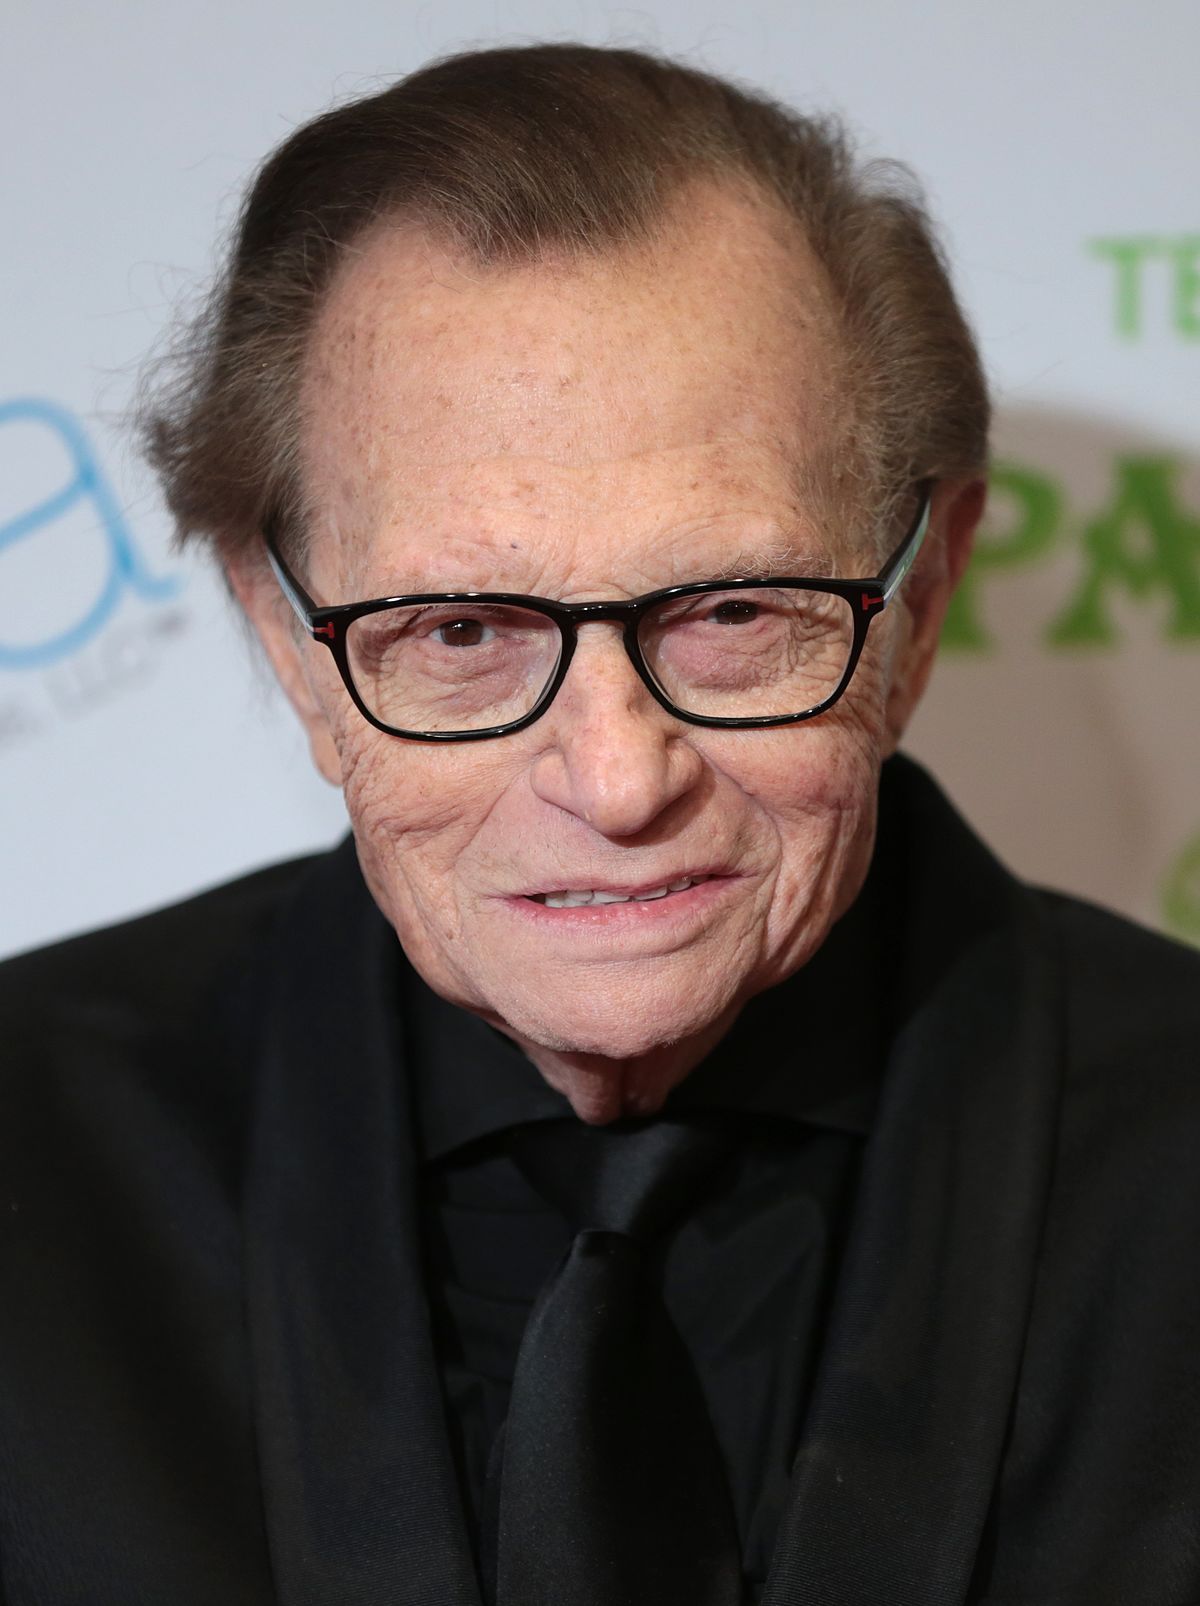 1200px-Larry_King_by_Gage_Skidmore_2.jpg